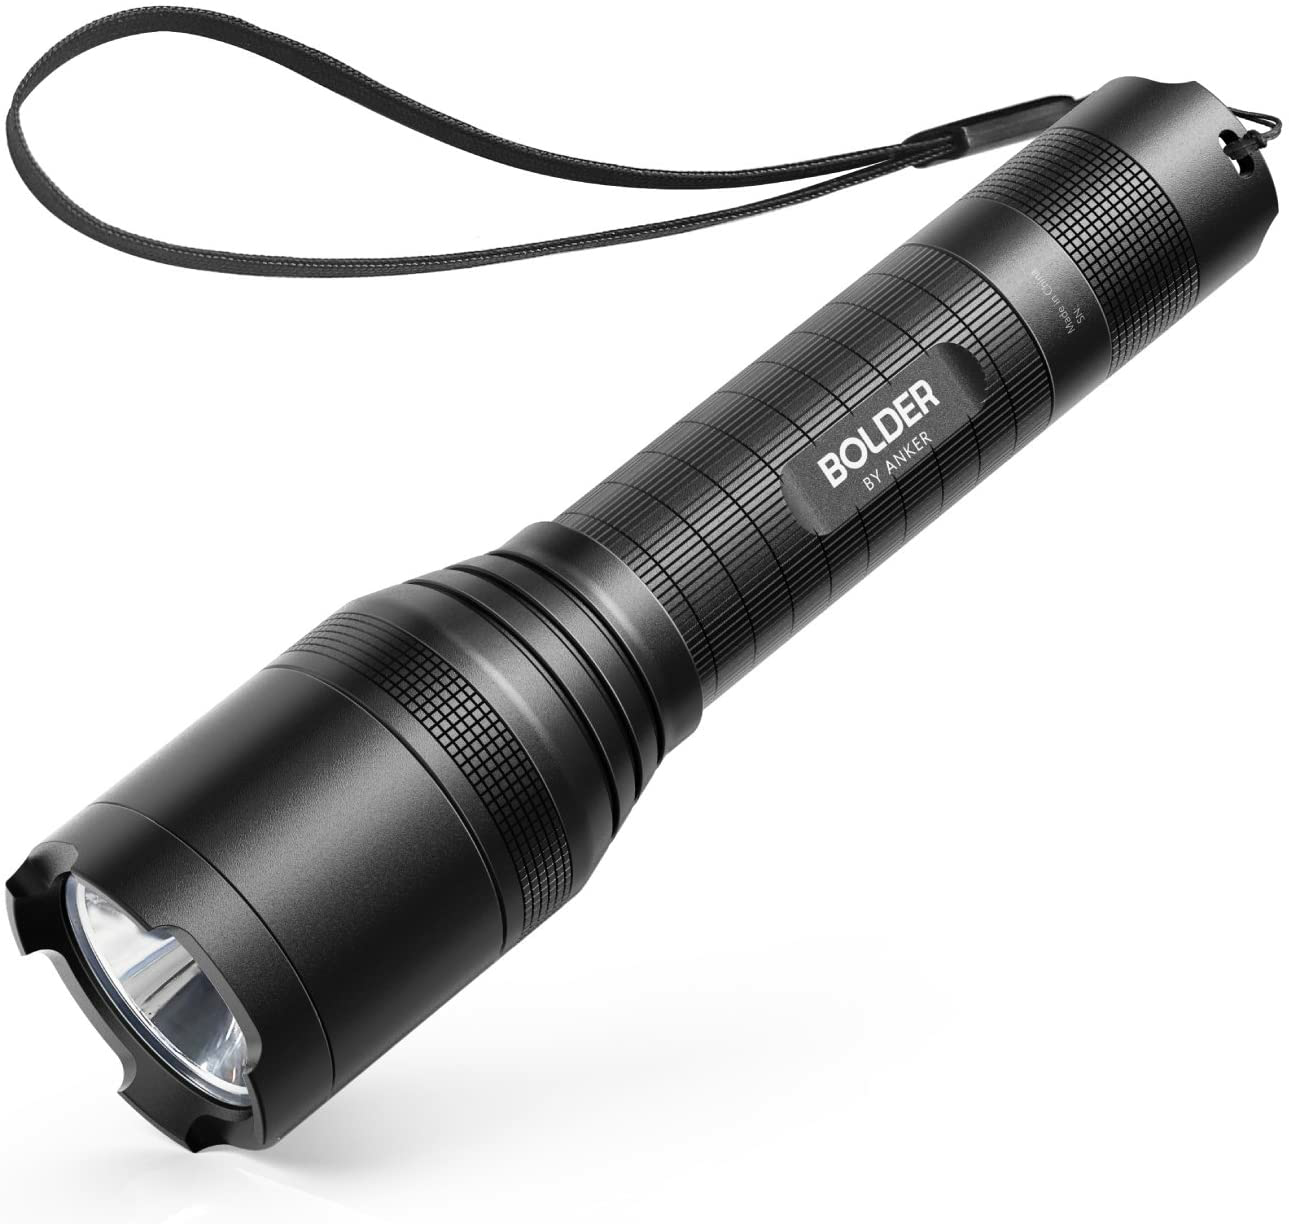 Used/Like New Anker Rechargeable Bolder LC90 LED Flashlight Pocket-Sized Super Bright 900 Lumens CREE LED, IPX5 Water-Resistant Zoomable 5 Light Modes Amazon.com $16.37